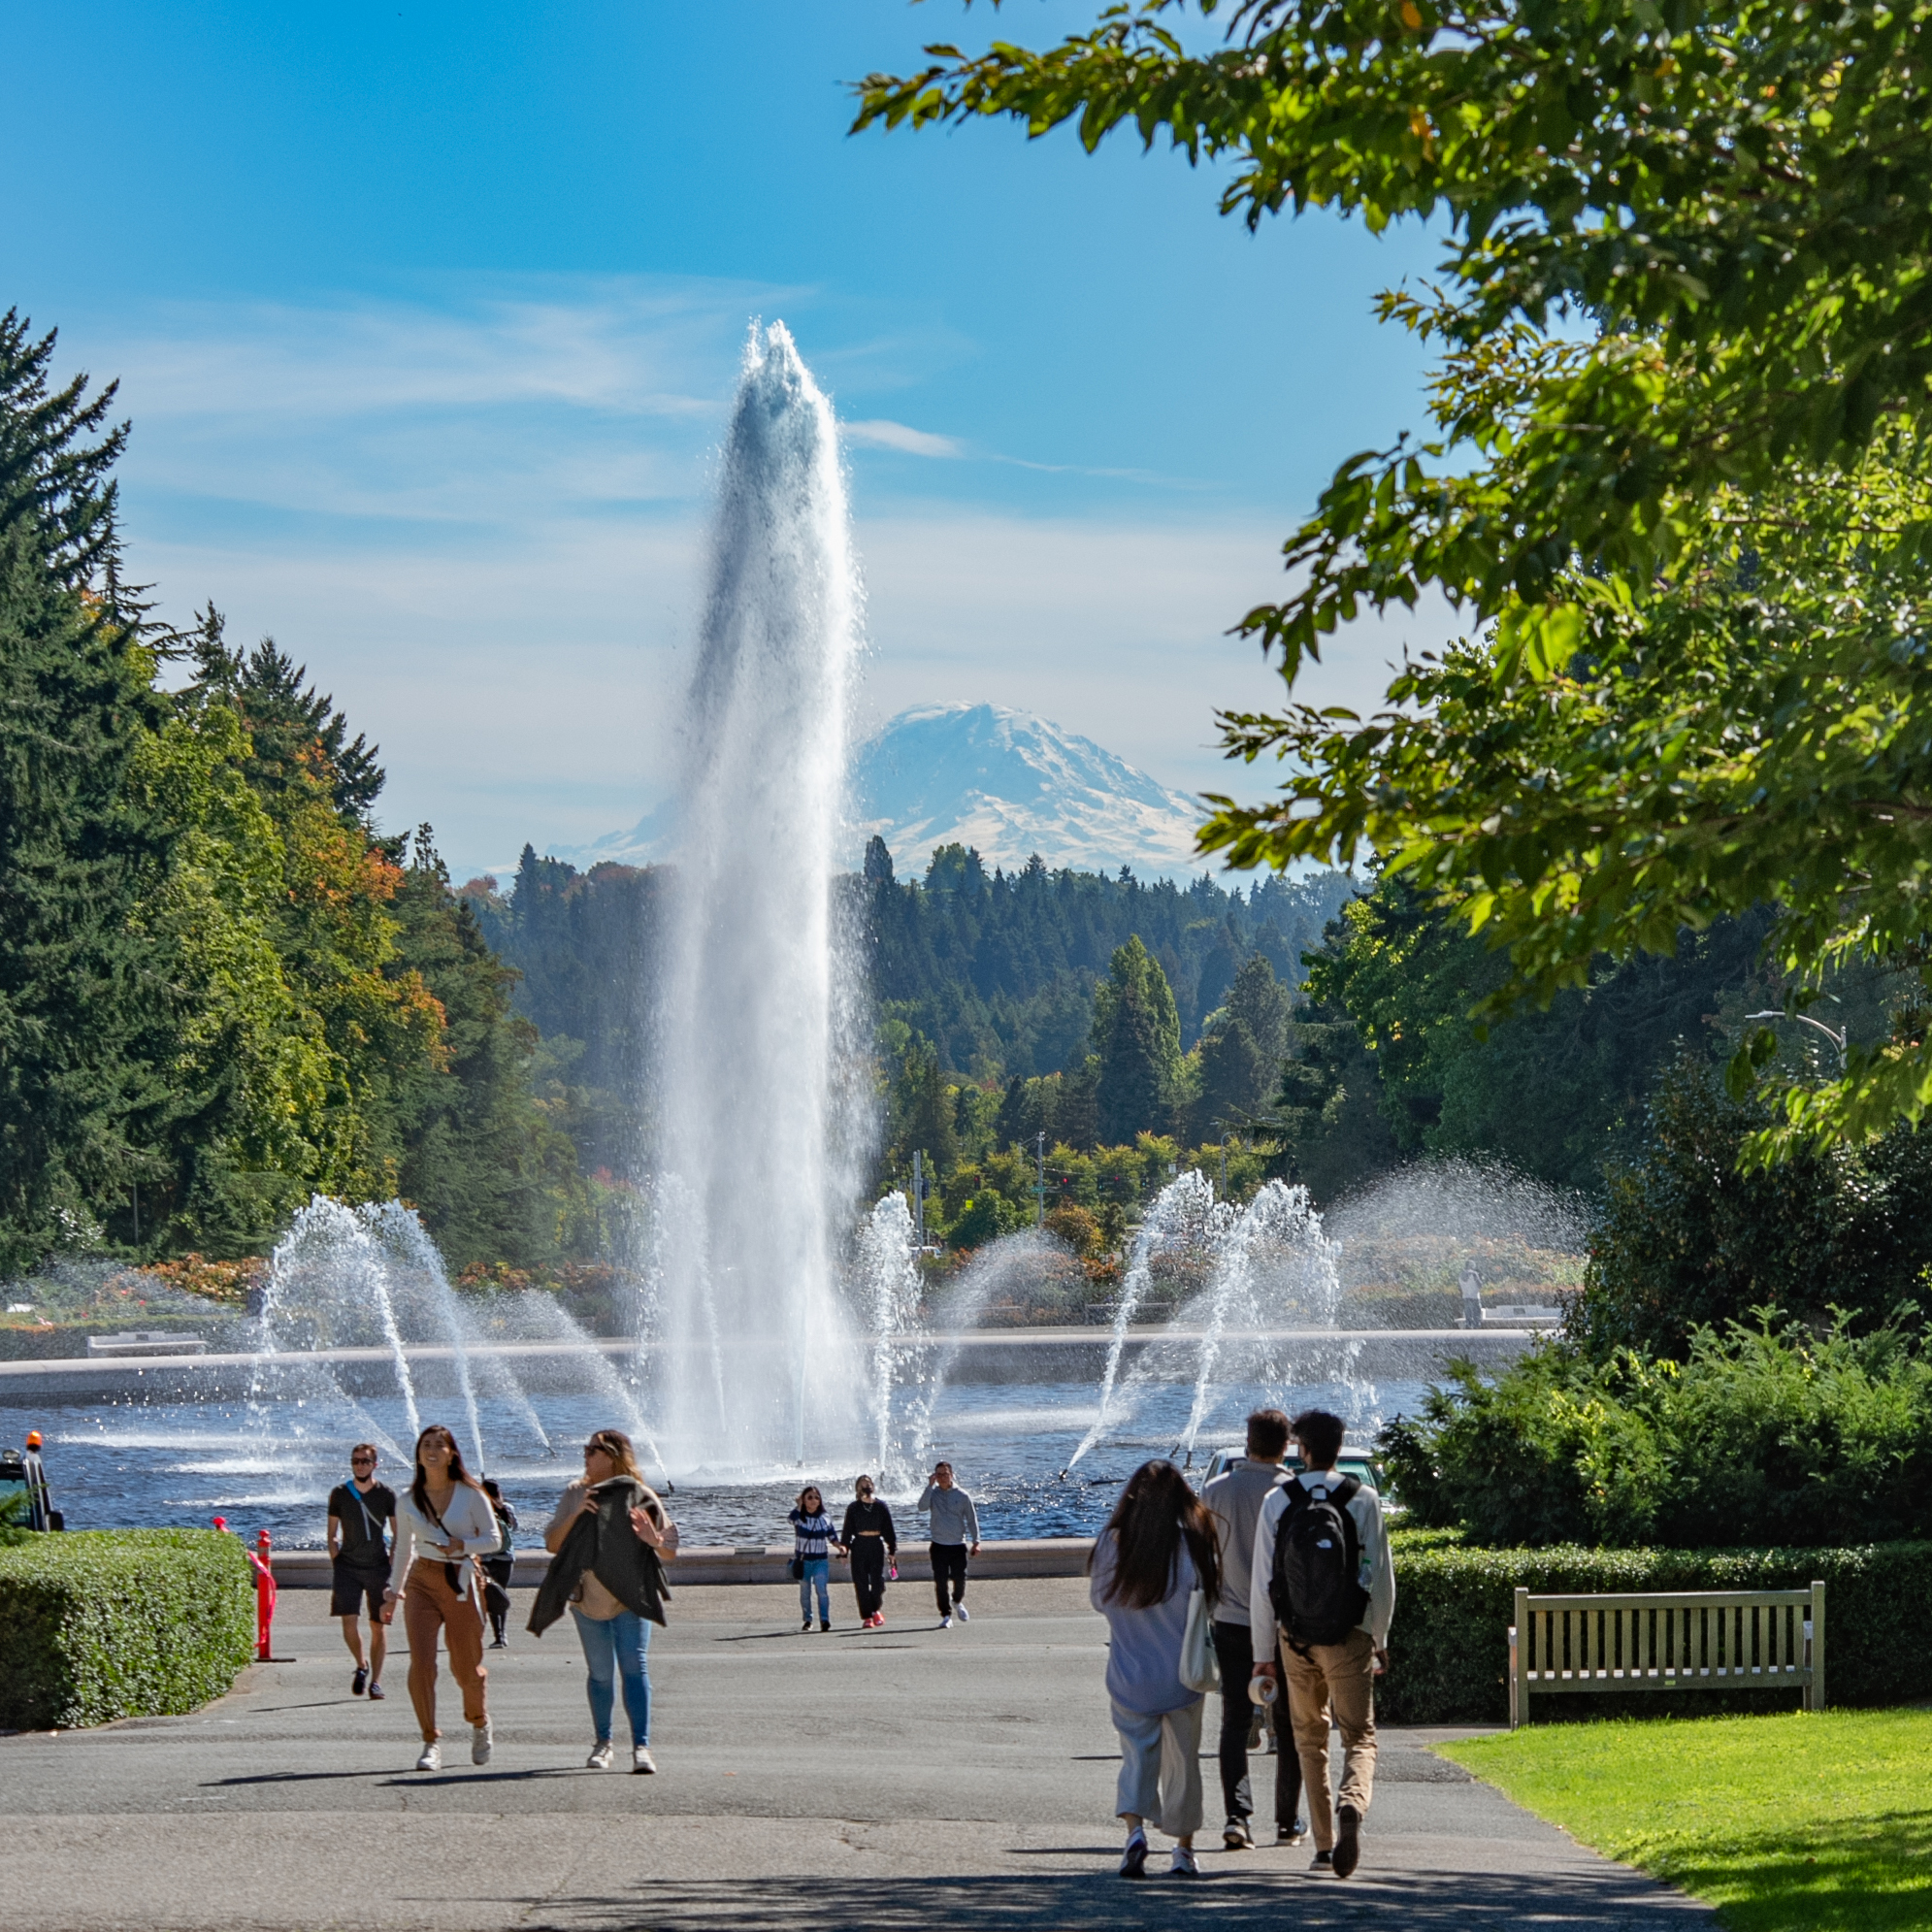 University of Washington campus pictured during summer